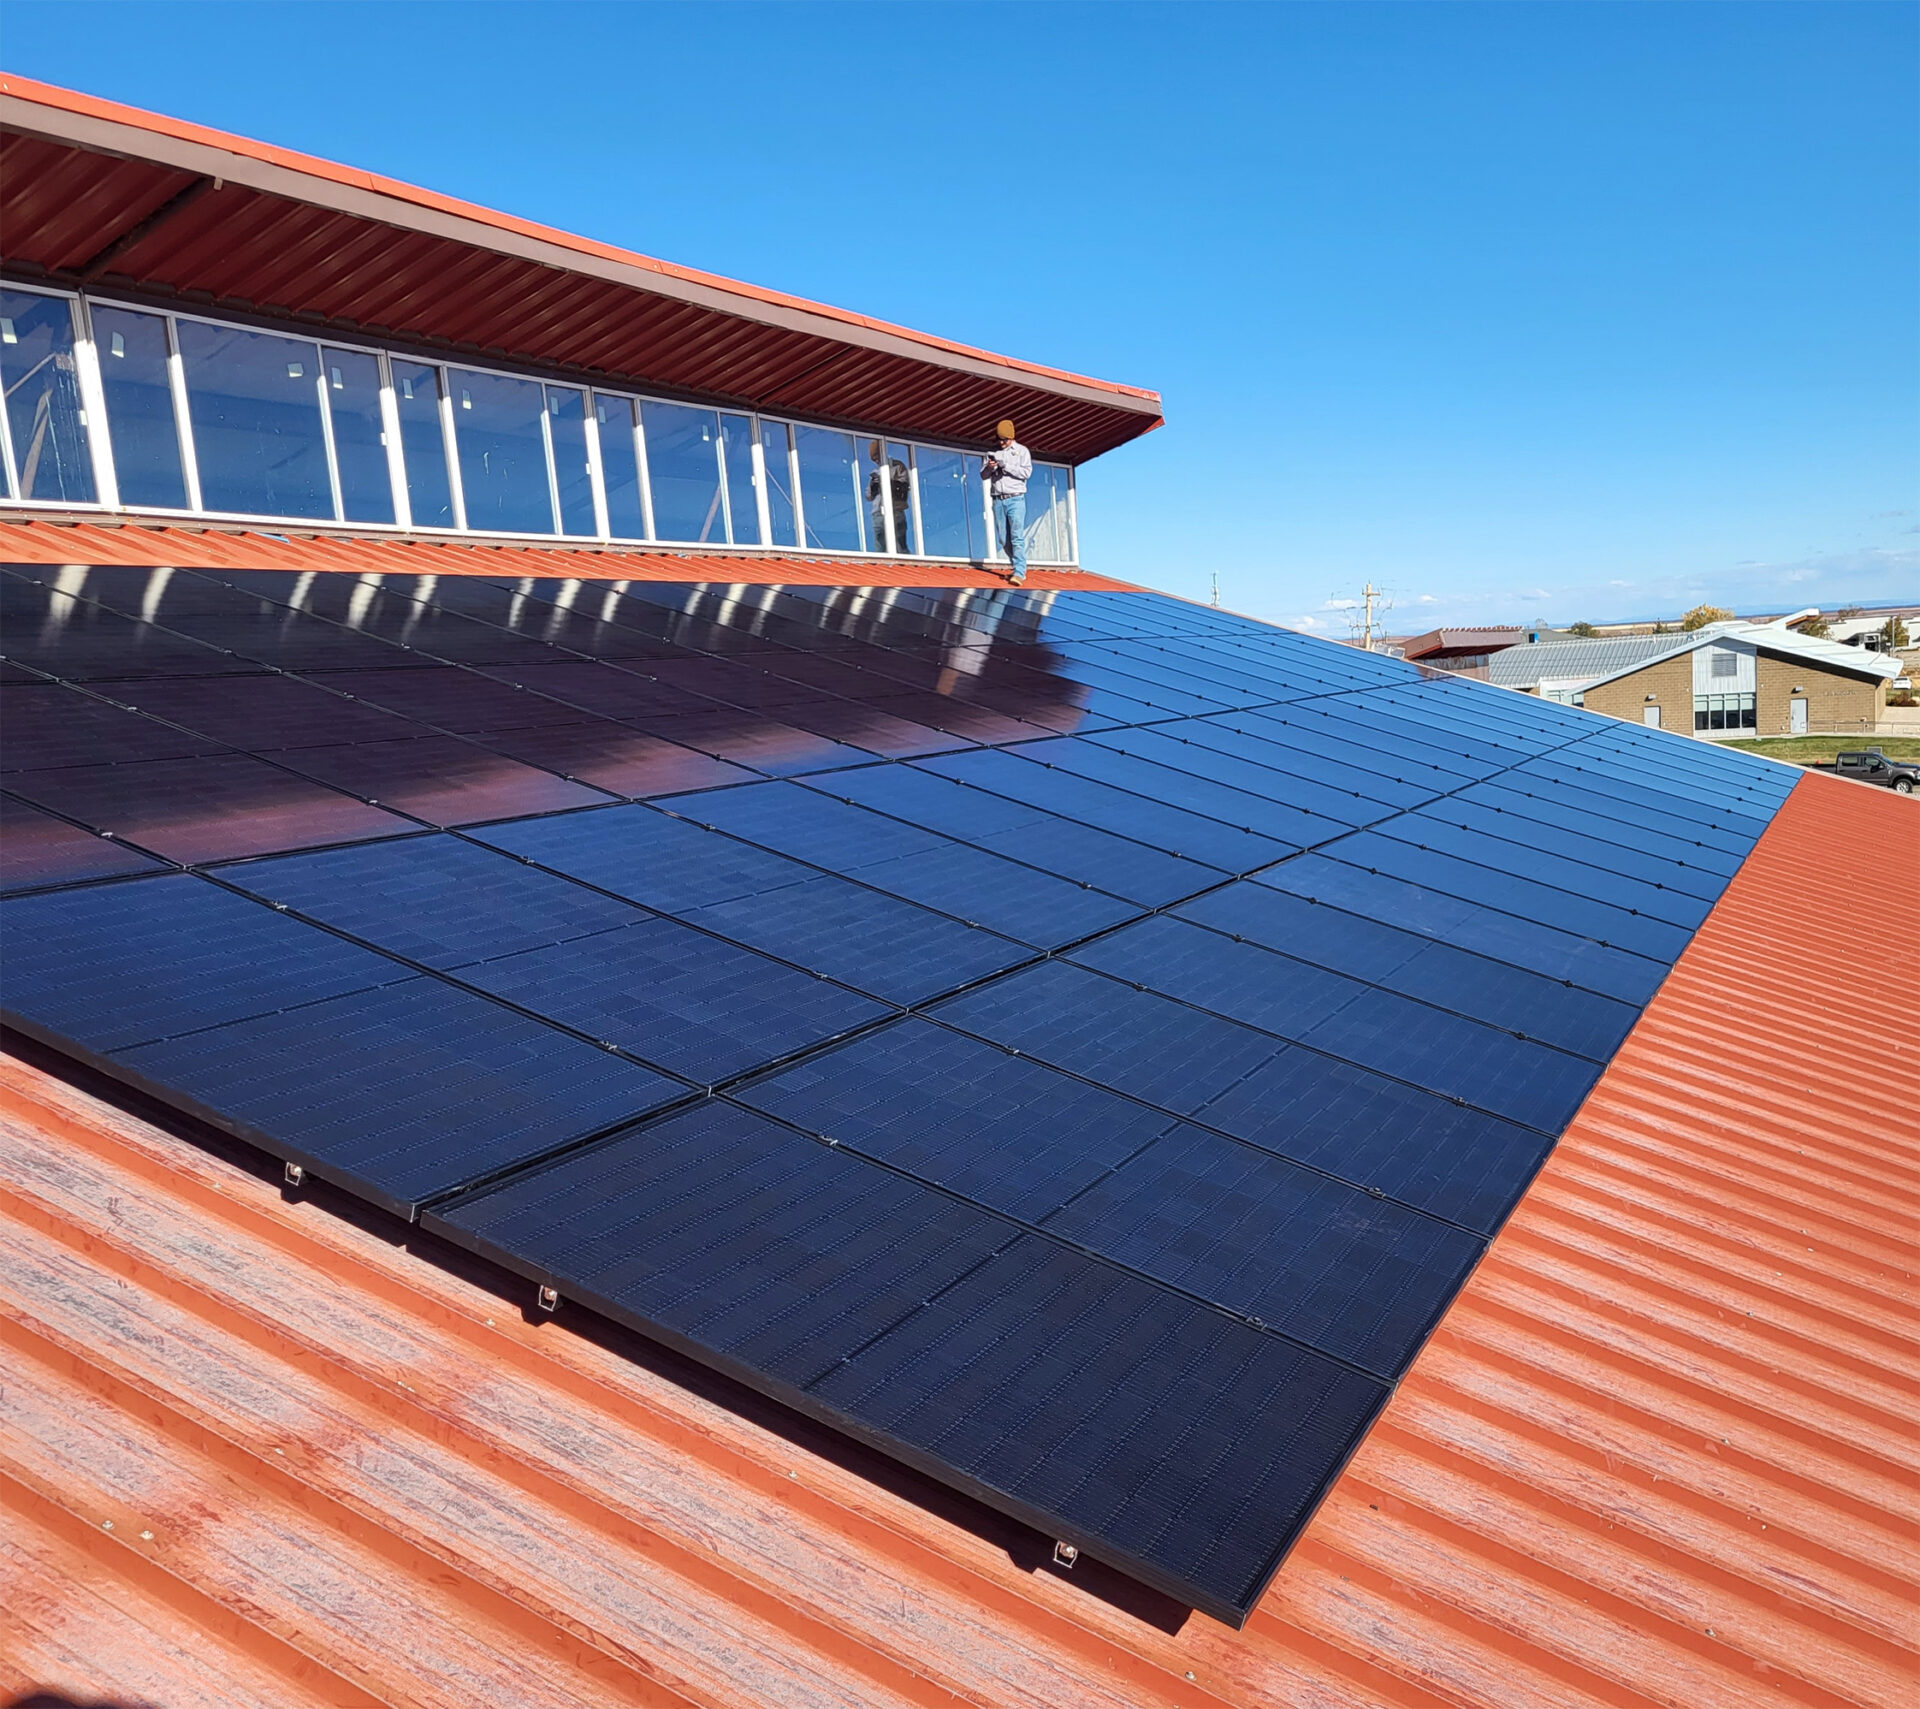 Angled view of solar panels on a red roof